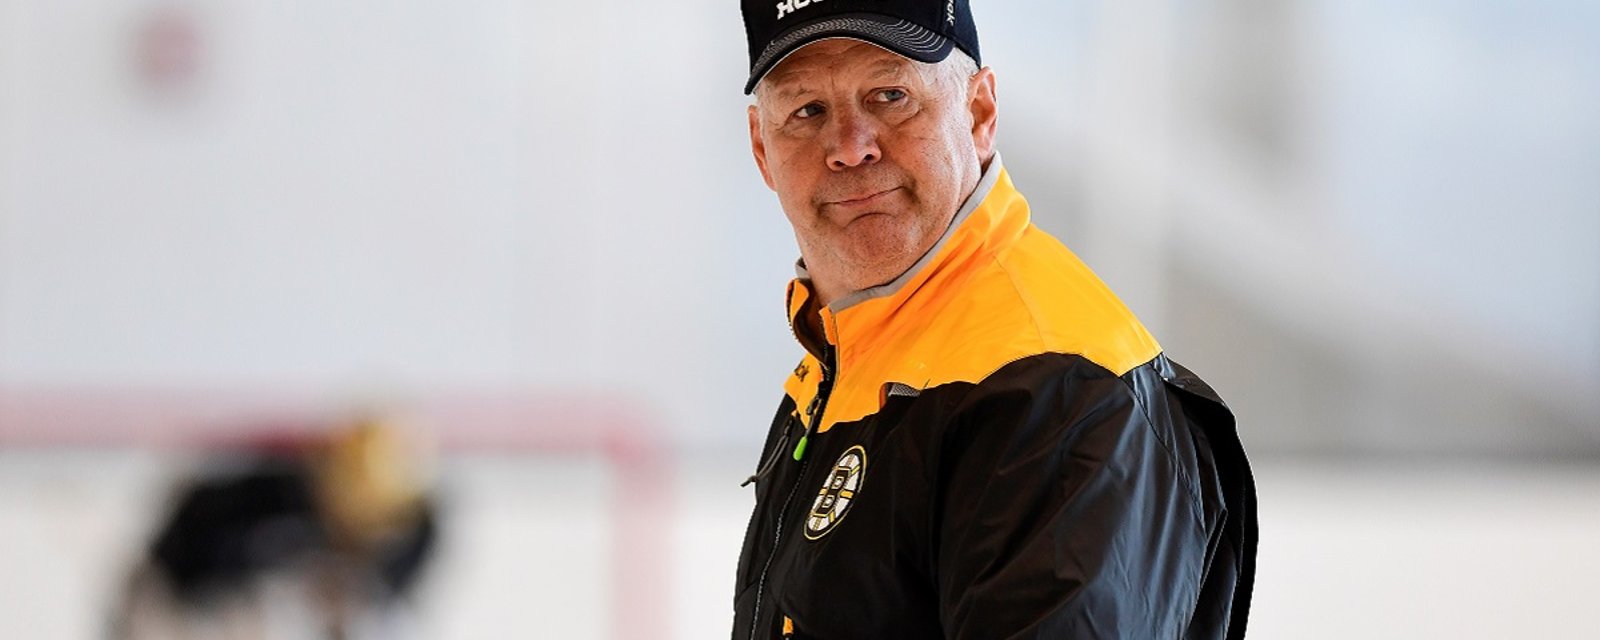 Breaking: NHL head coach fired, Claude Julien hired to replace him.